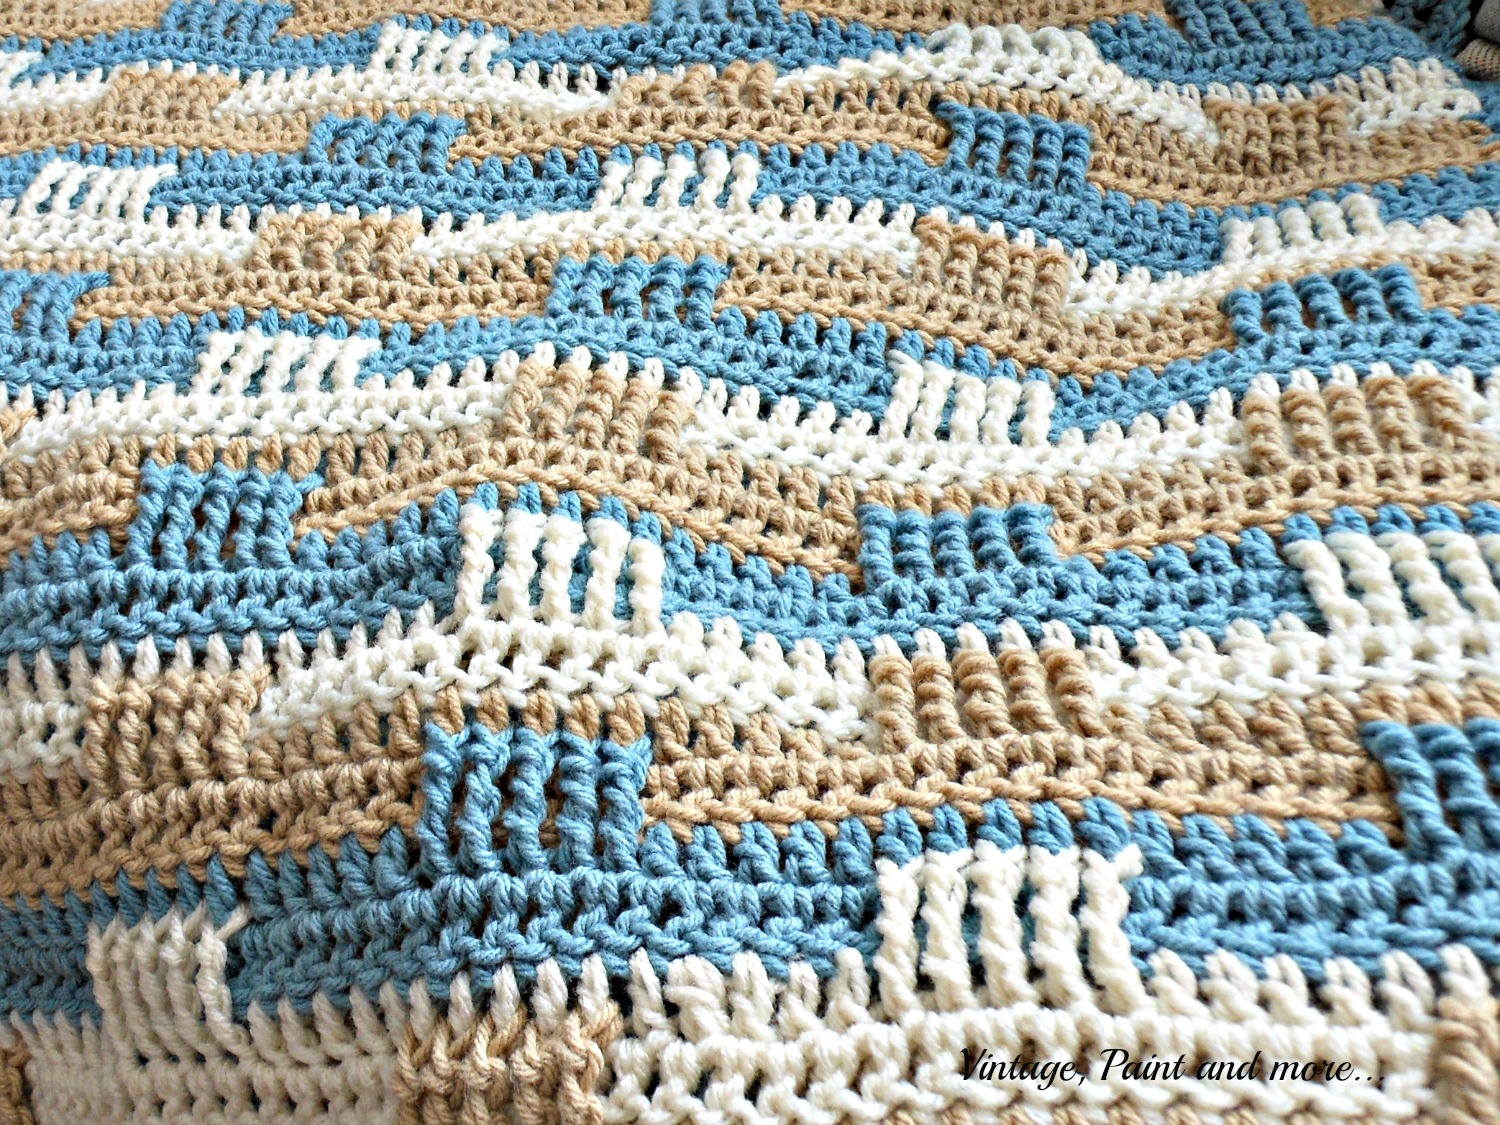 Crochet Weave Blanket Pattern Crochet Afghan And Stenciled Pillow Vintage Paint And More